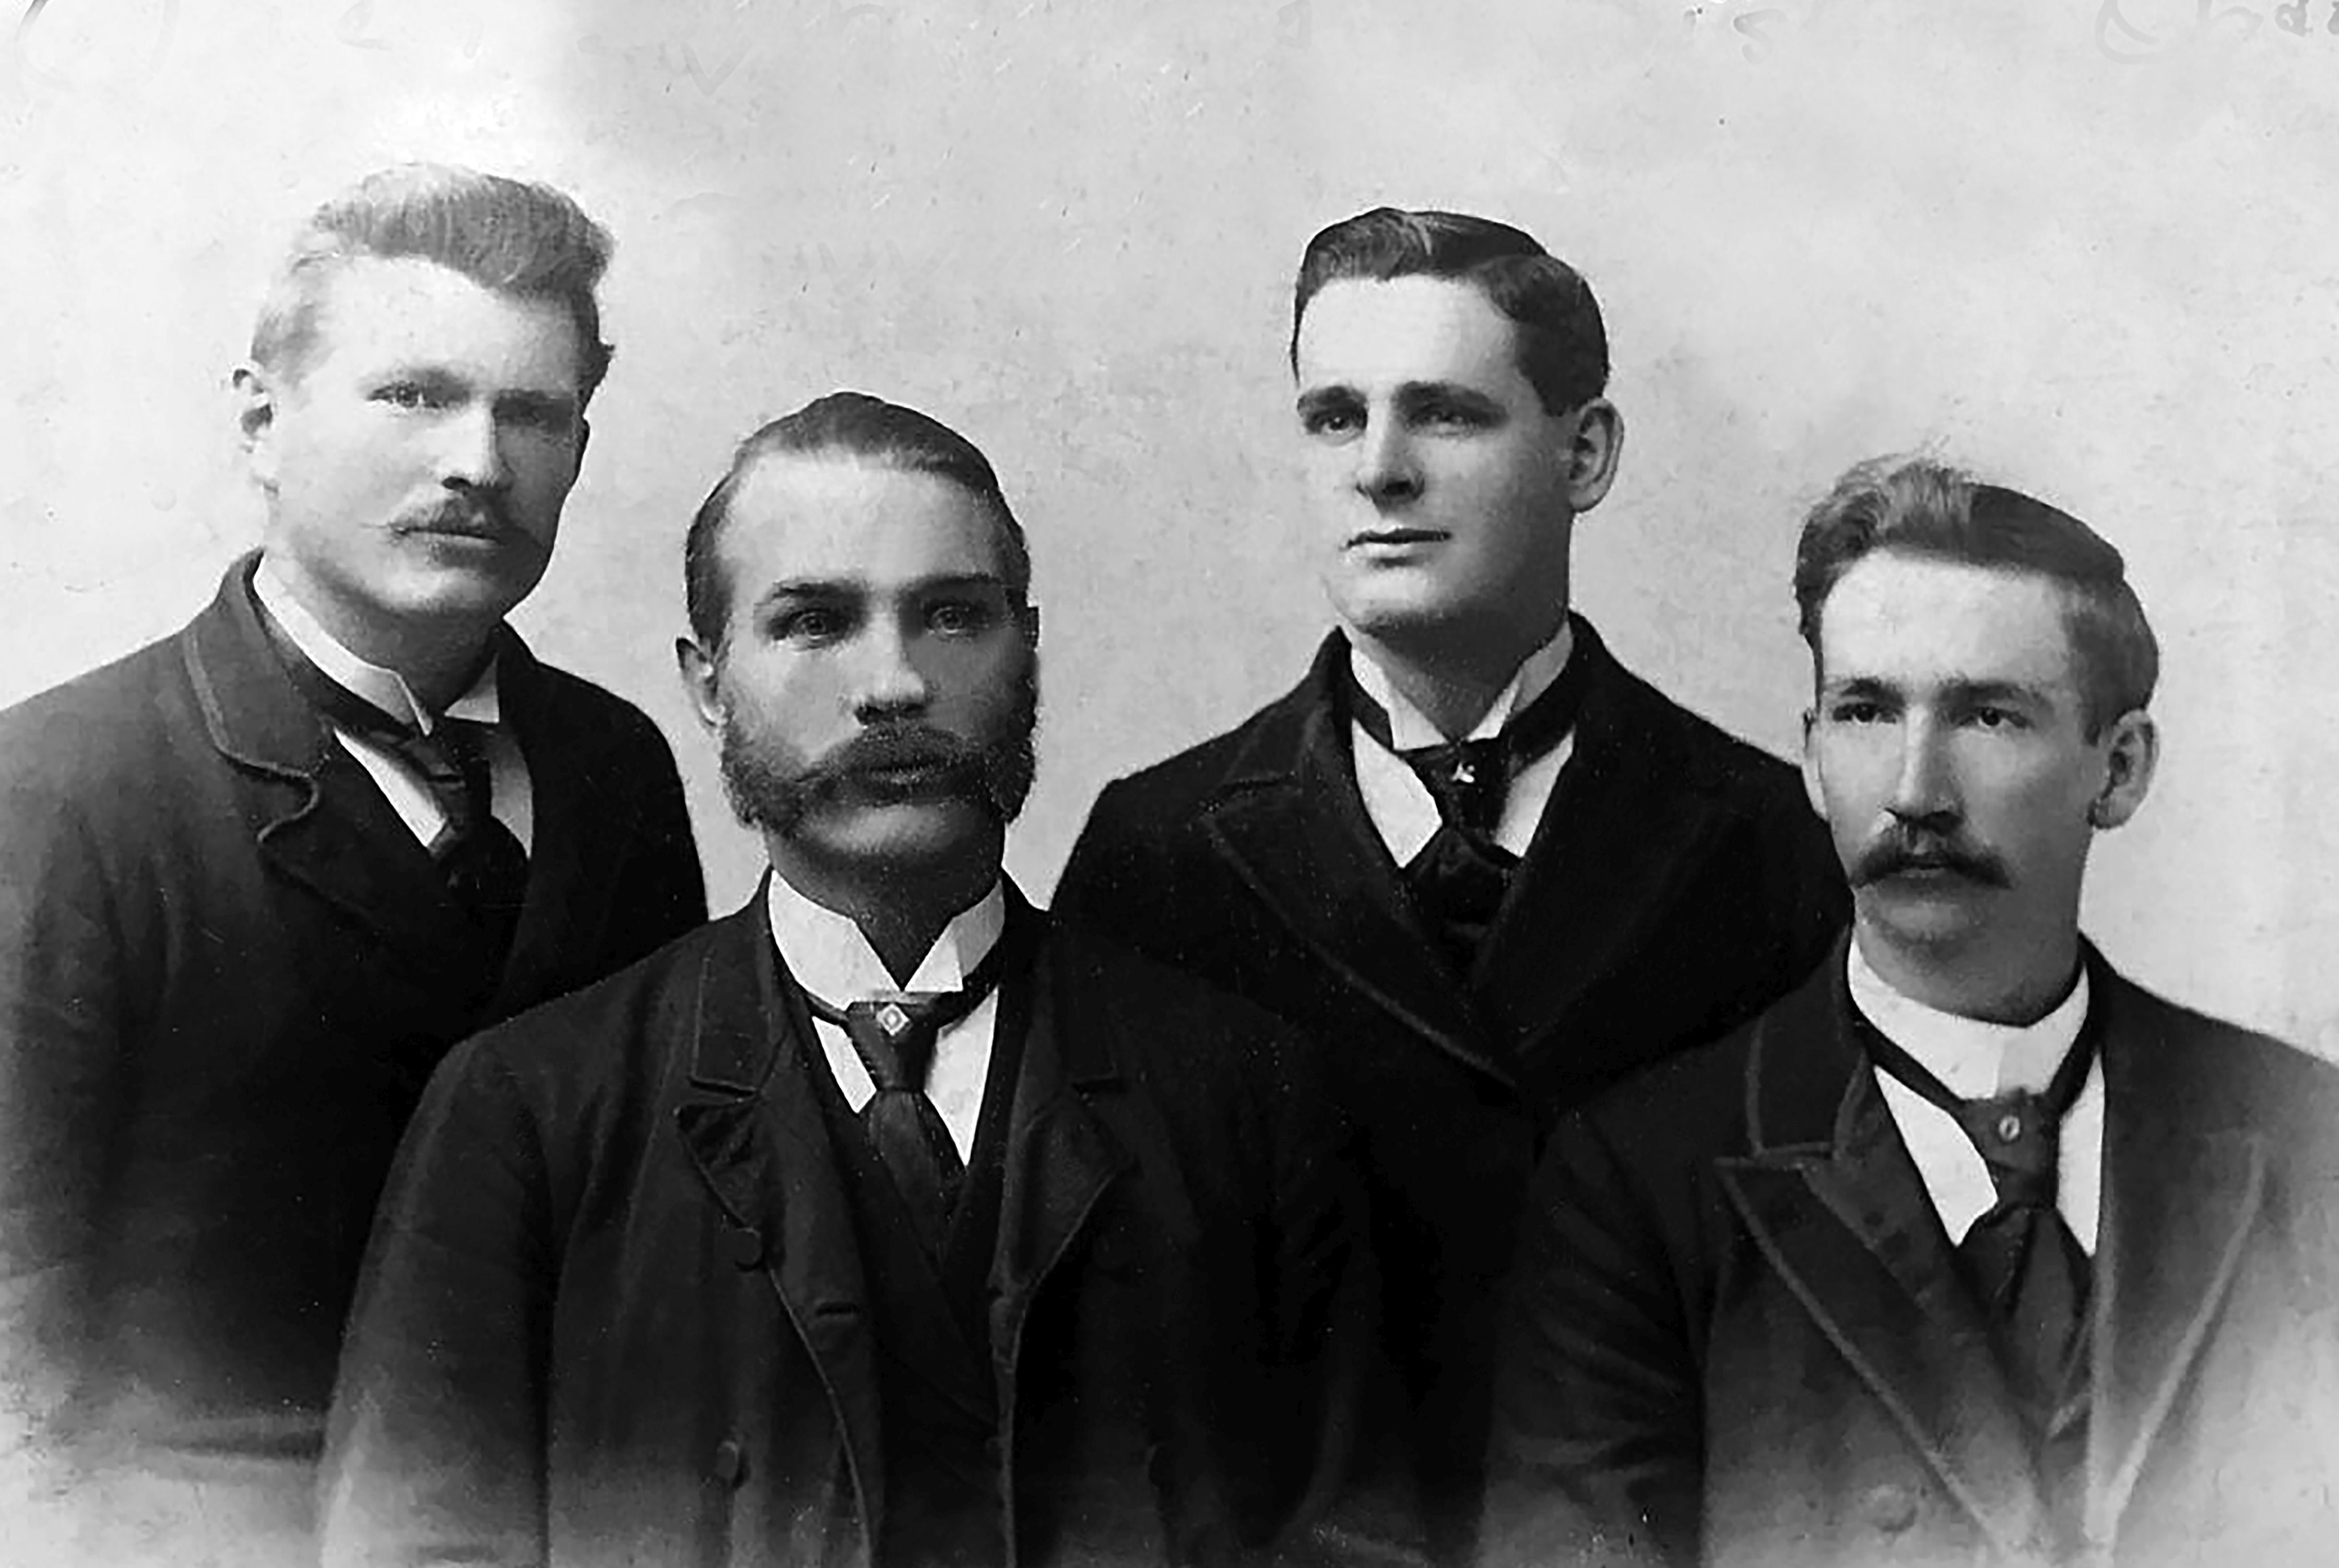 1895 – Southern States missionaries